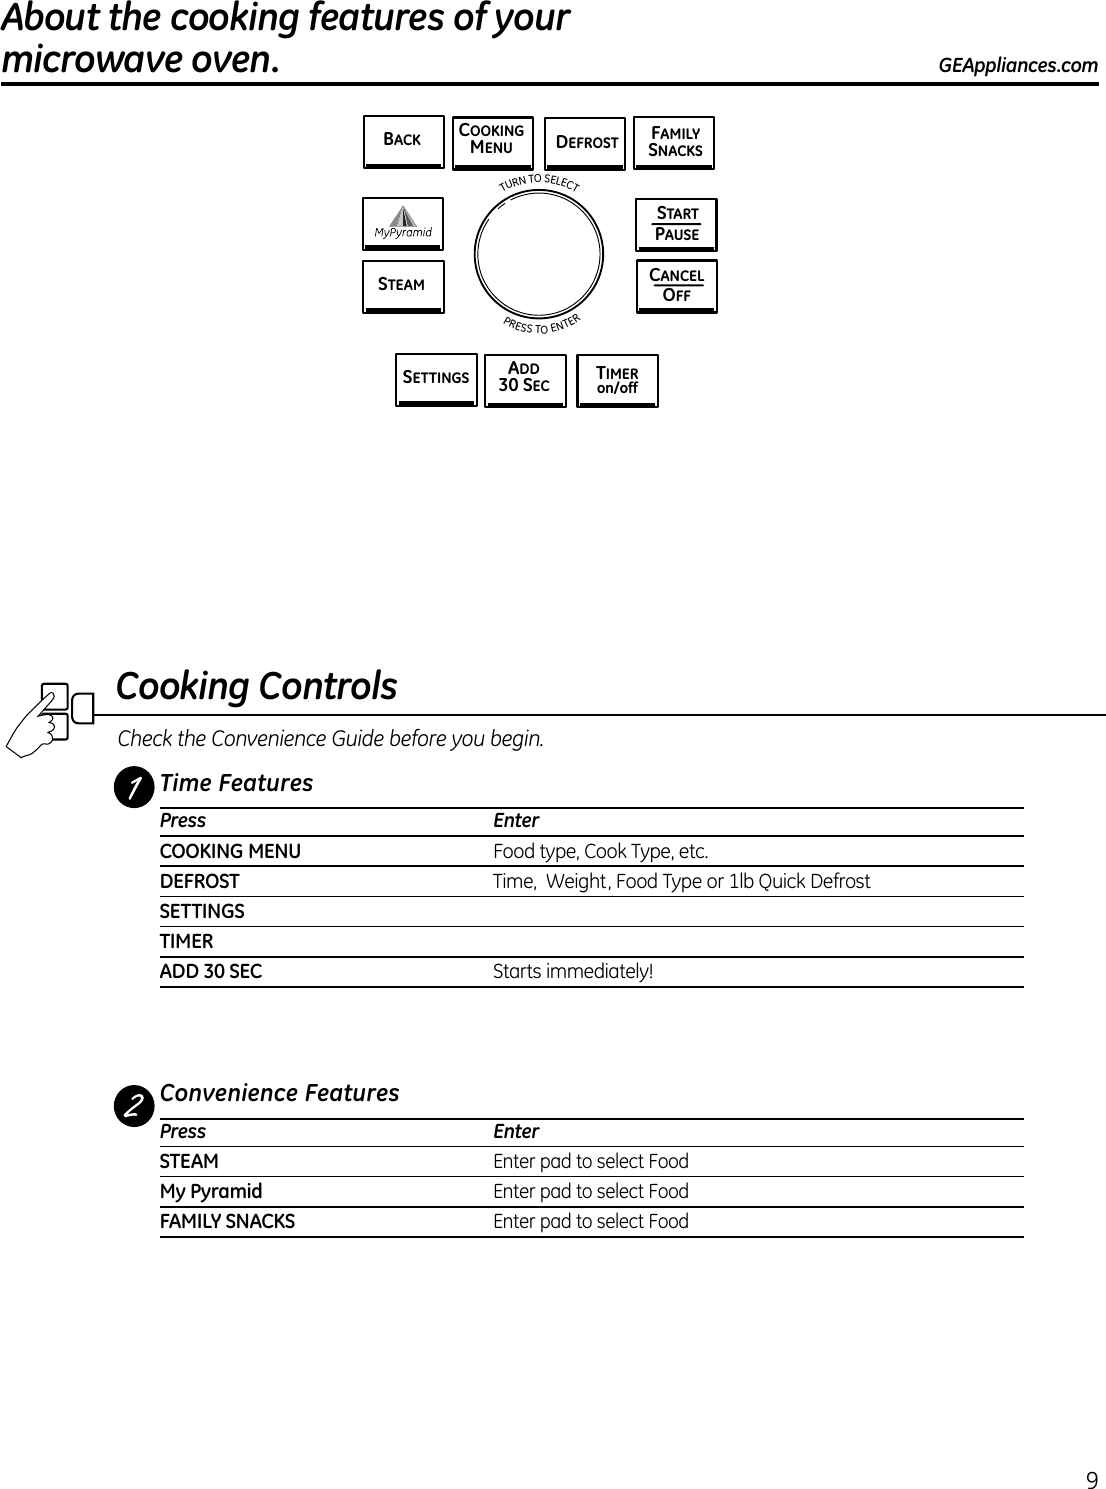 9About the cooking features of your  microwave oven. GEAppliances.comTIMERon/offSETTINGS ADD30 SECSTARTPAUSECANCELOFFDEFROSTBACK COOKINGMENUTURN TO SELECT      PRESS TO ENTERSTEAMFAMILYSNACKSCooking ControlsTime FeaturesPress  EnterCOOKING MENU  Food type, Cook Type, etc.DEFROST  Time,  Weight, Food Type or 1lb Quick Defrost   SETTINGSTIMERADD 30 SEC  Starts immediately!Convenience FeaturesPress  Enter STEAM Enter pad to select FoodMy Pyramid Enter pad to select FoodFAMILY SNACKS Enter pad to select Food Check the Convenience Guide before you begin.